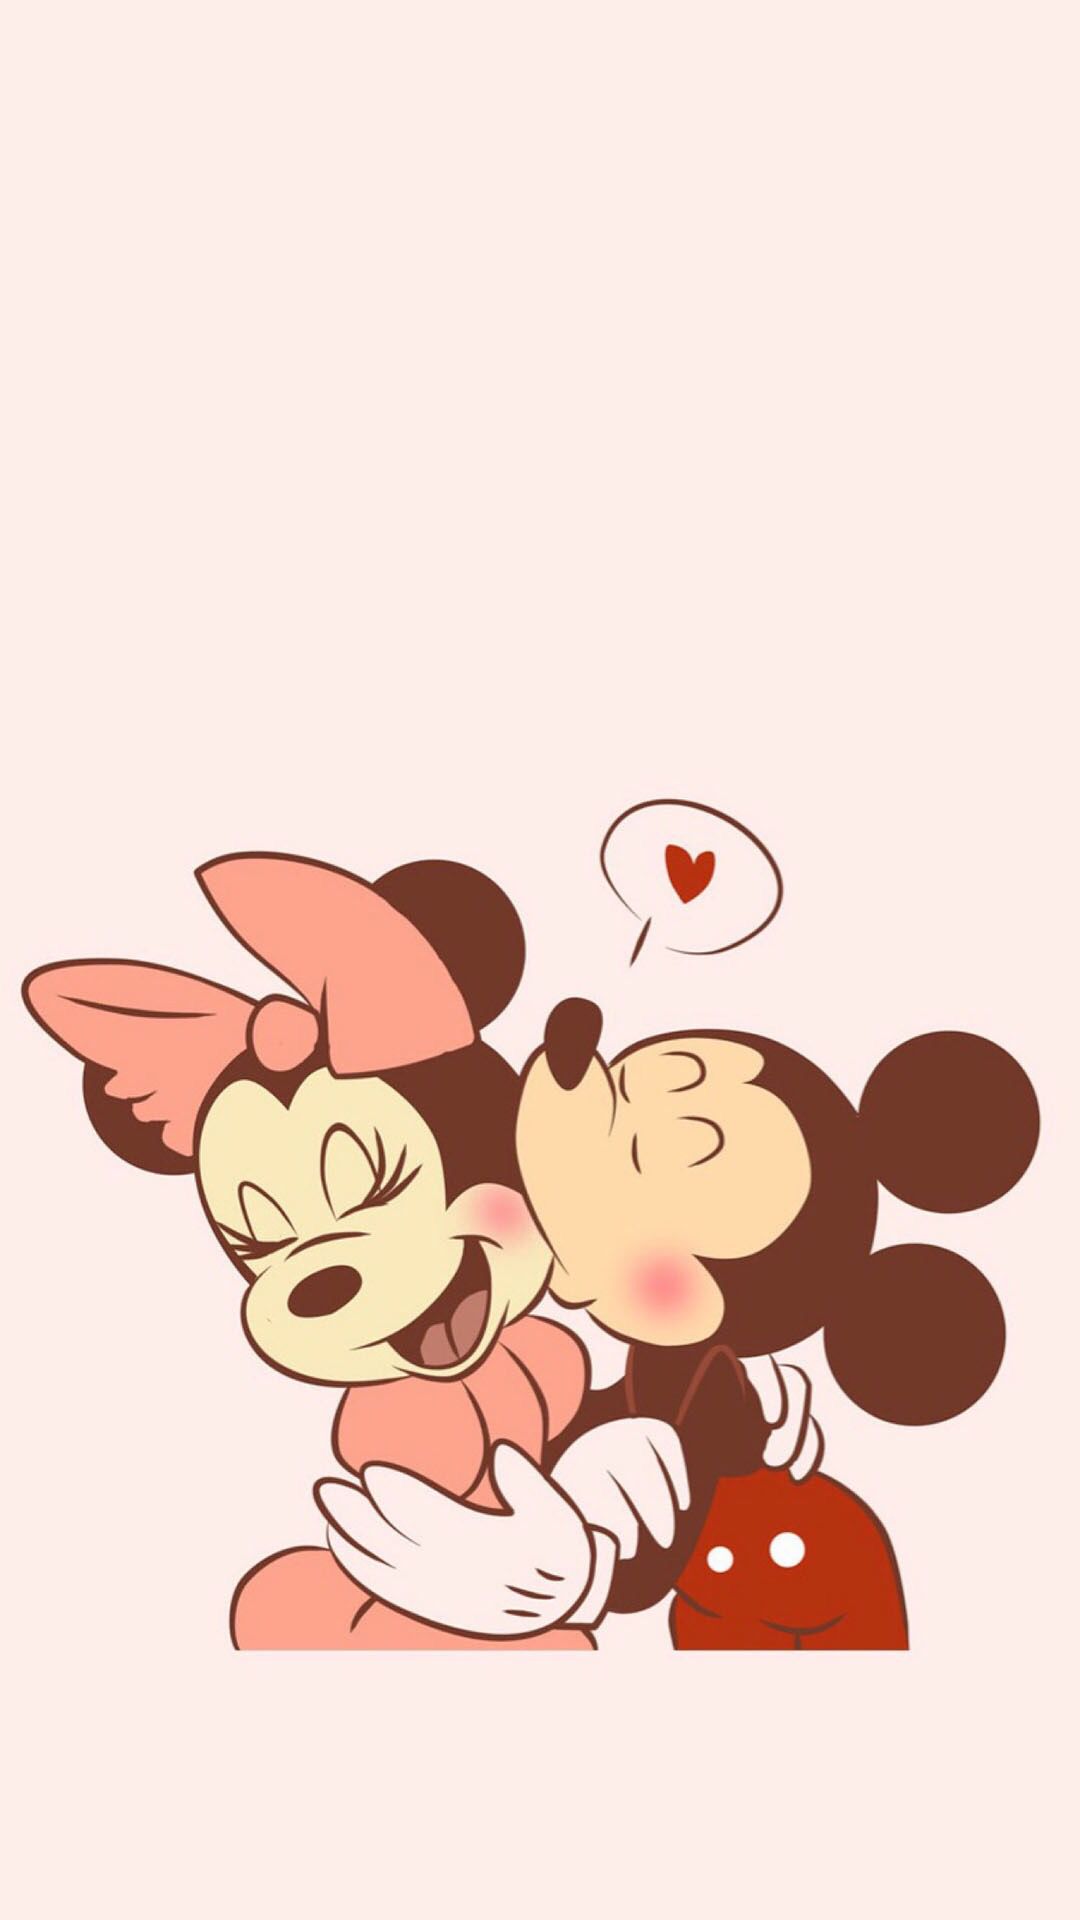 Cute Mickey and Minnie Mouse Wallpaper Free Cute Mickey and Minnie Mouse Background